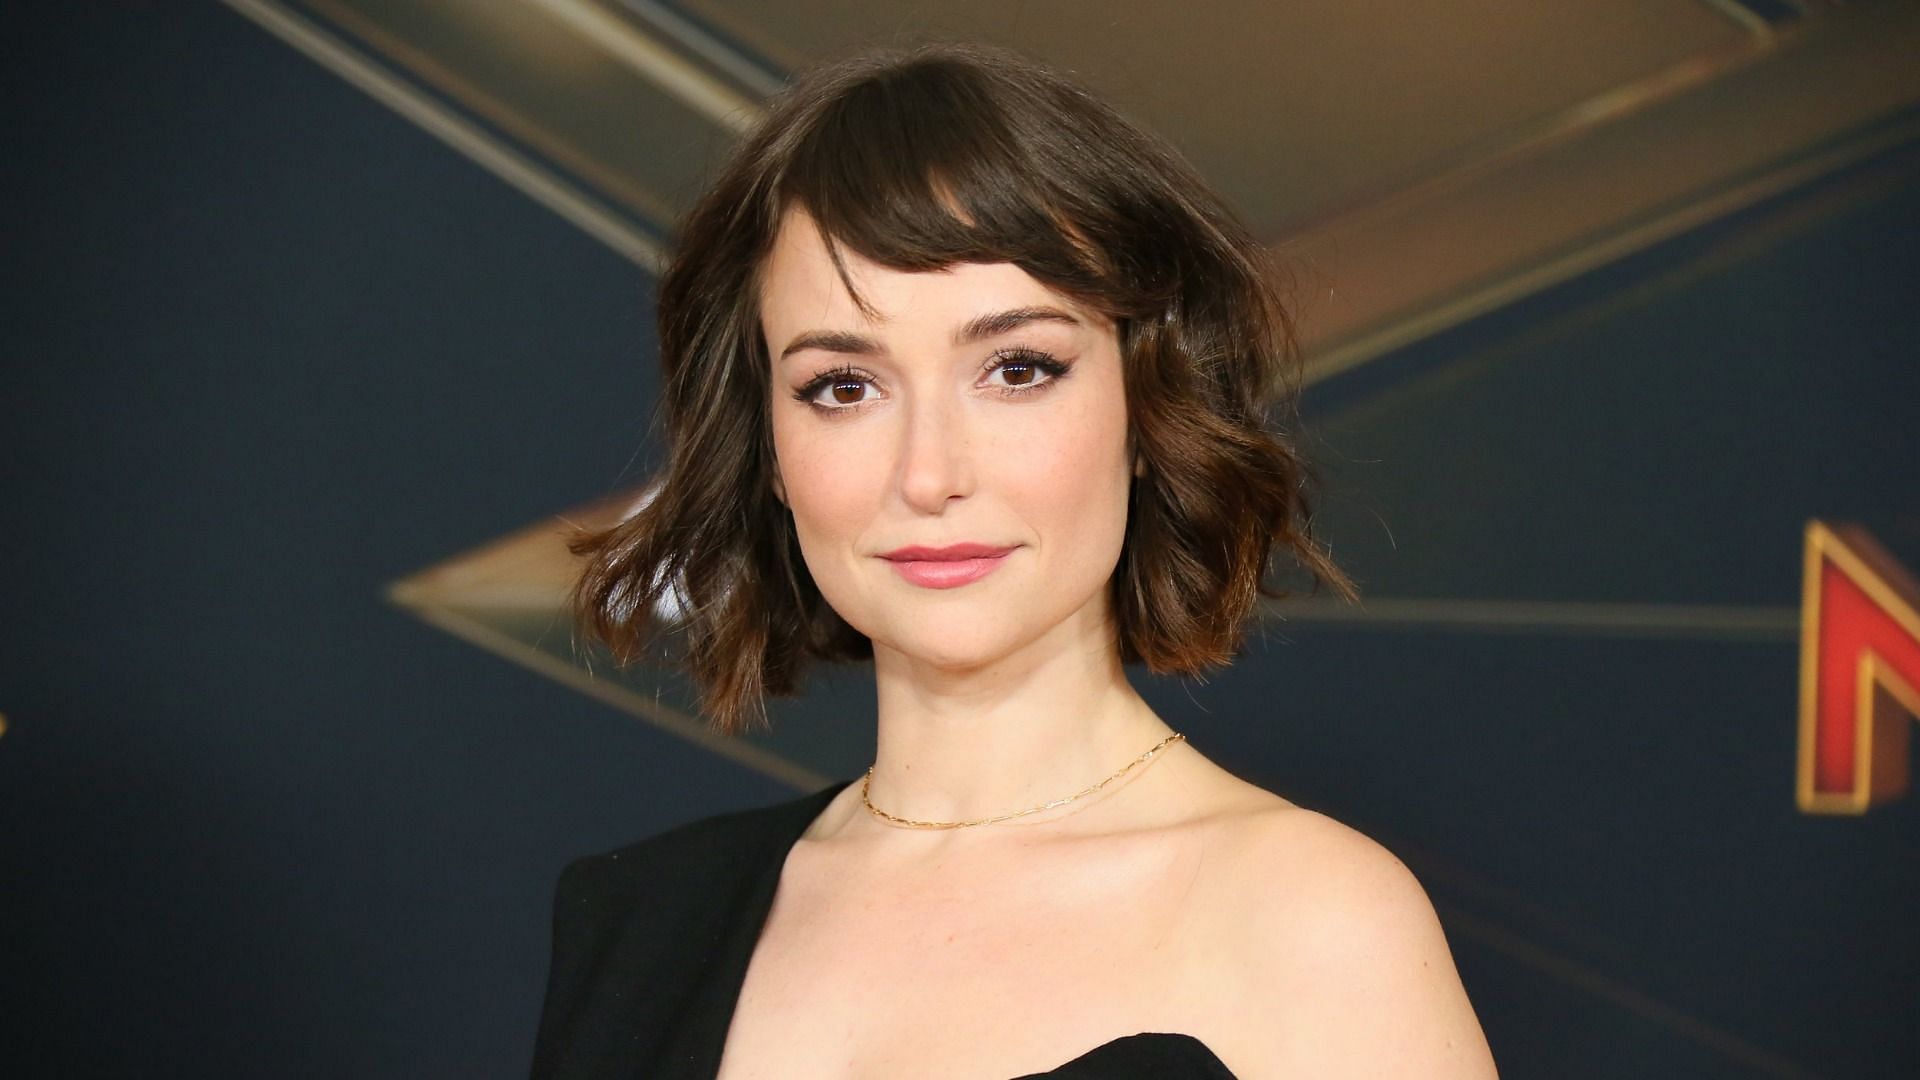  Milana Vayntrub Net Worth and Salary: How Much She Earns From AT&T Advertisements?